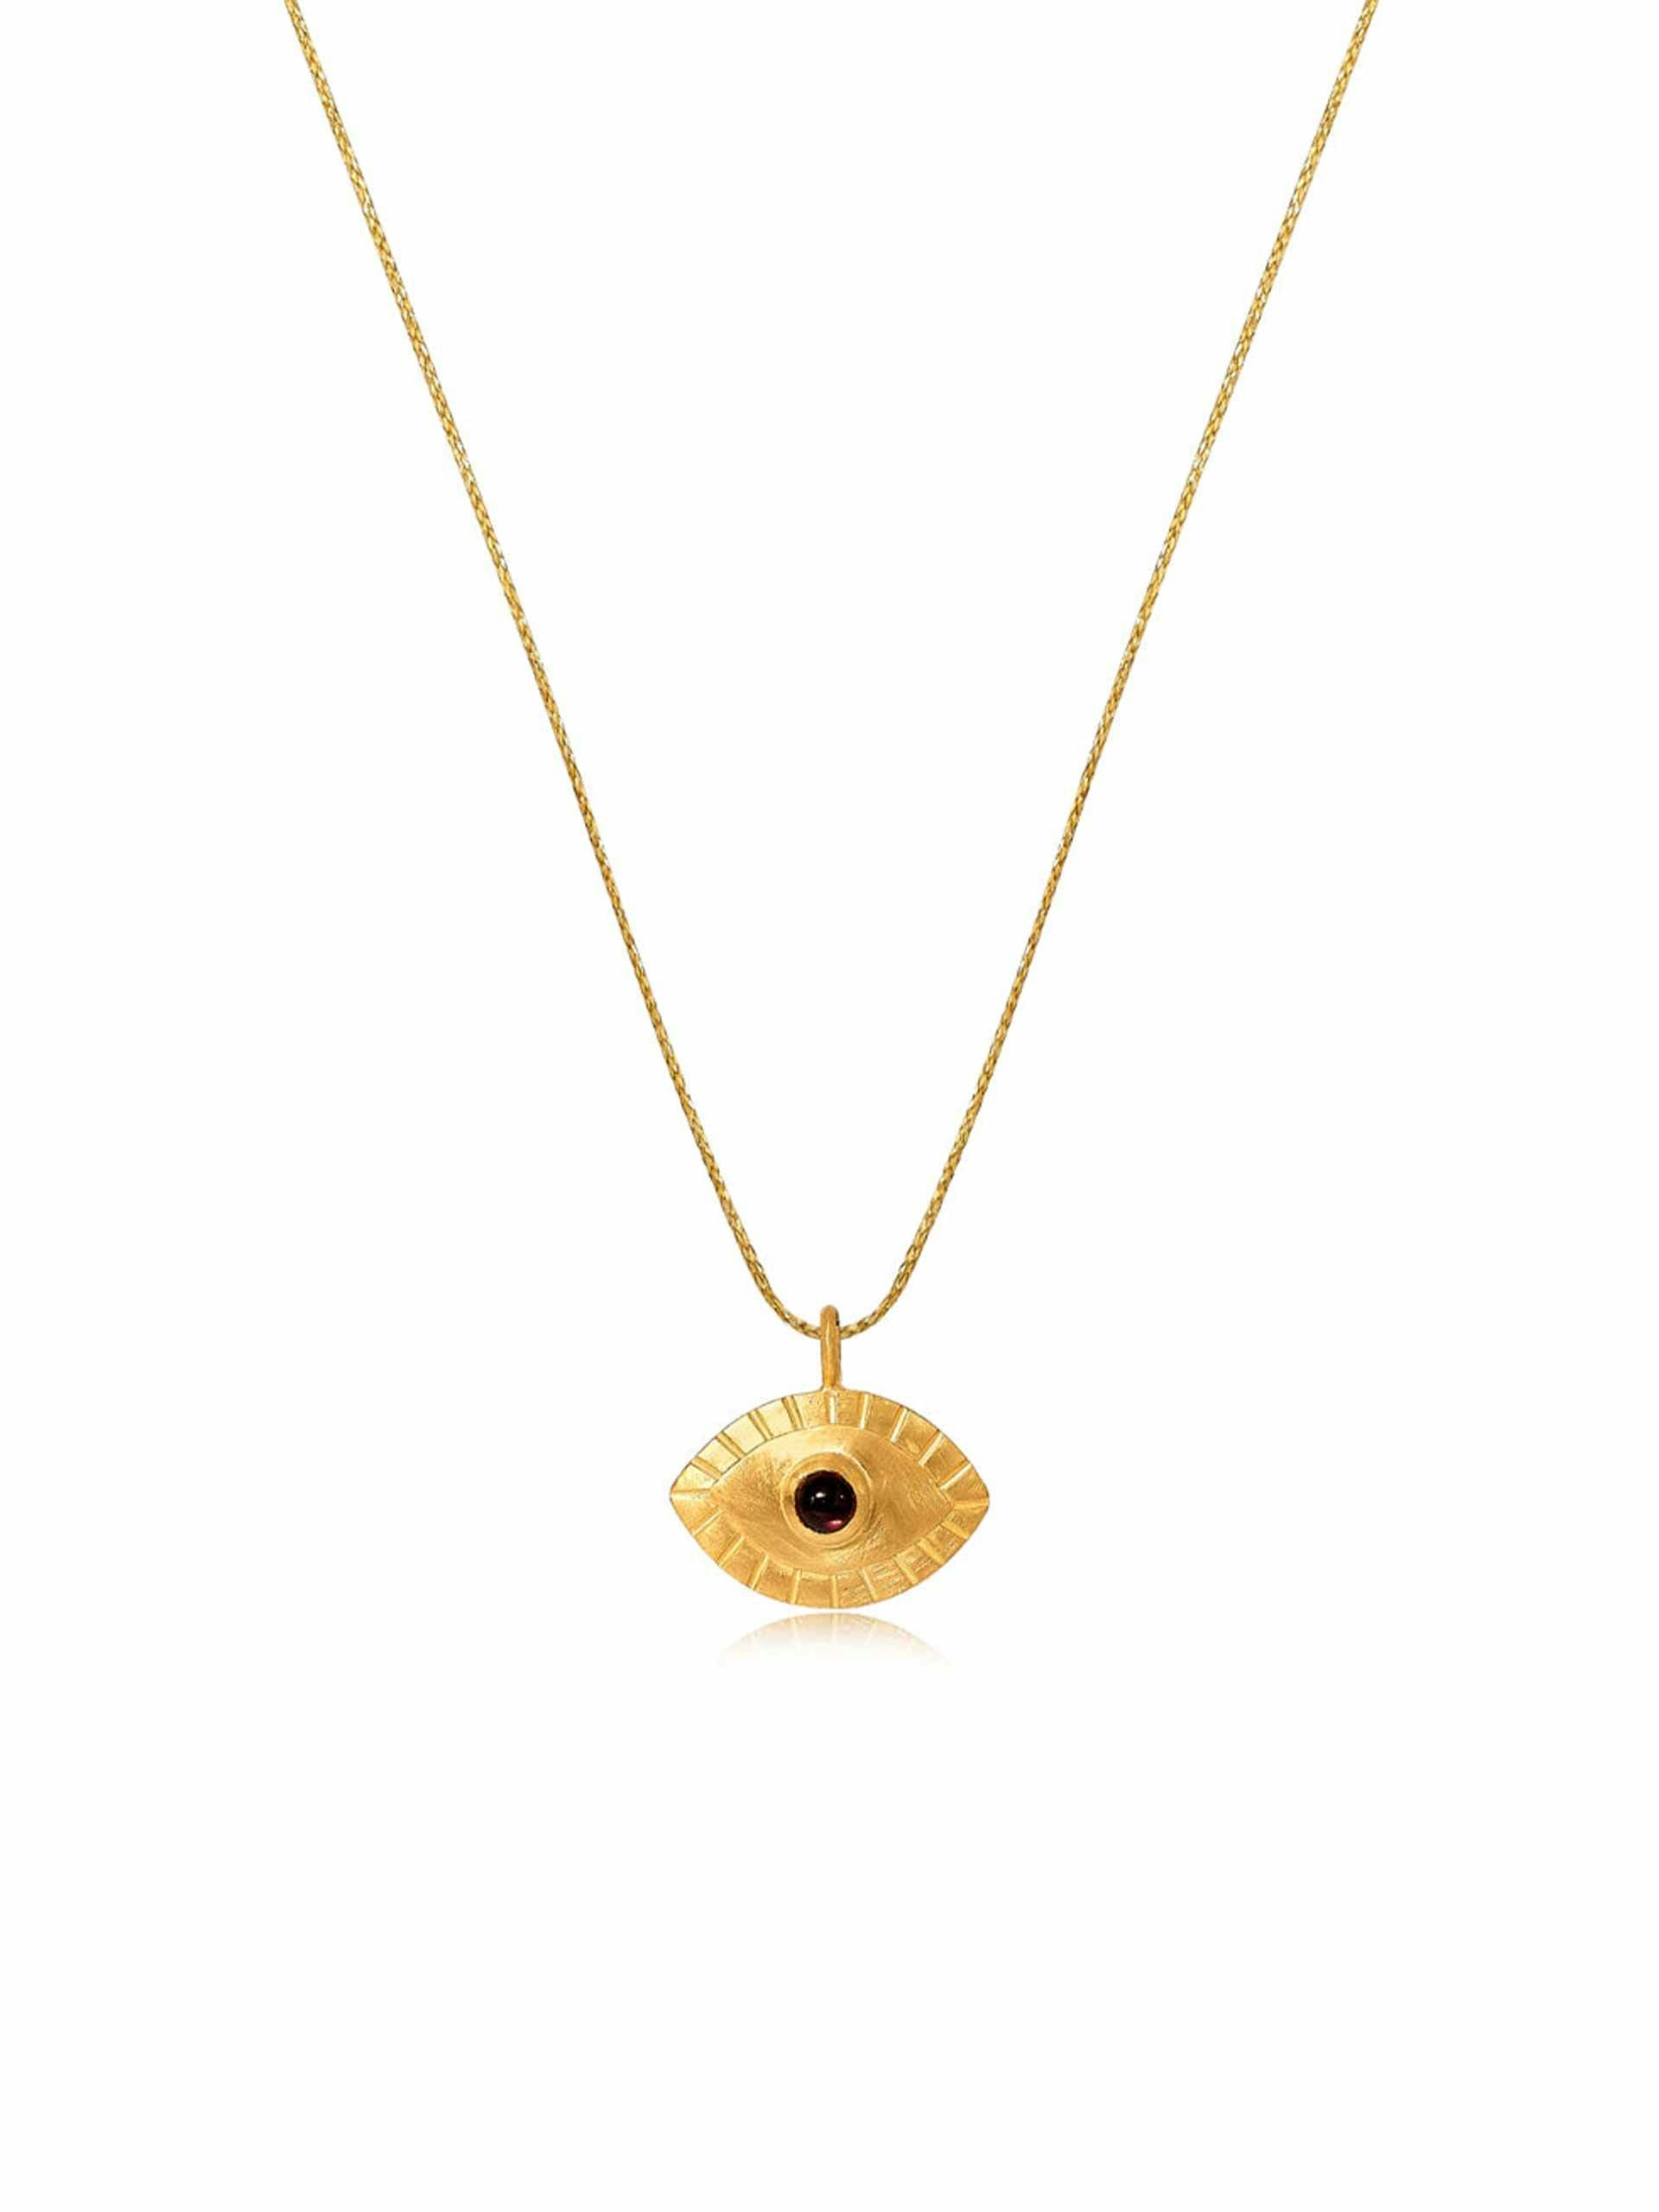 Gold and opal eye necklace